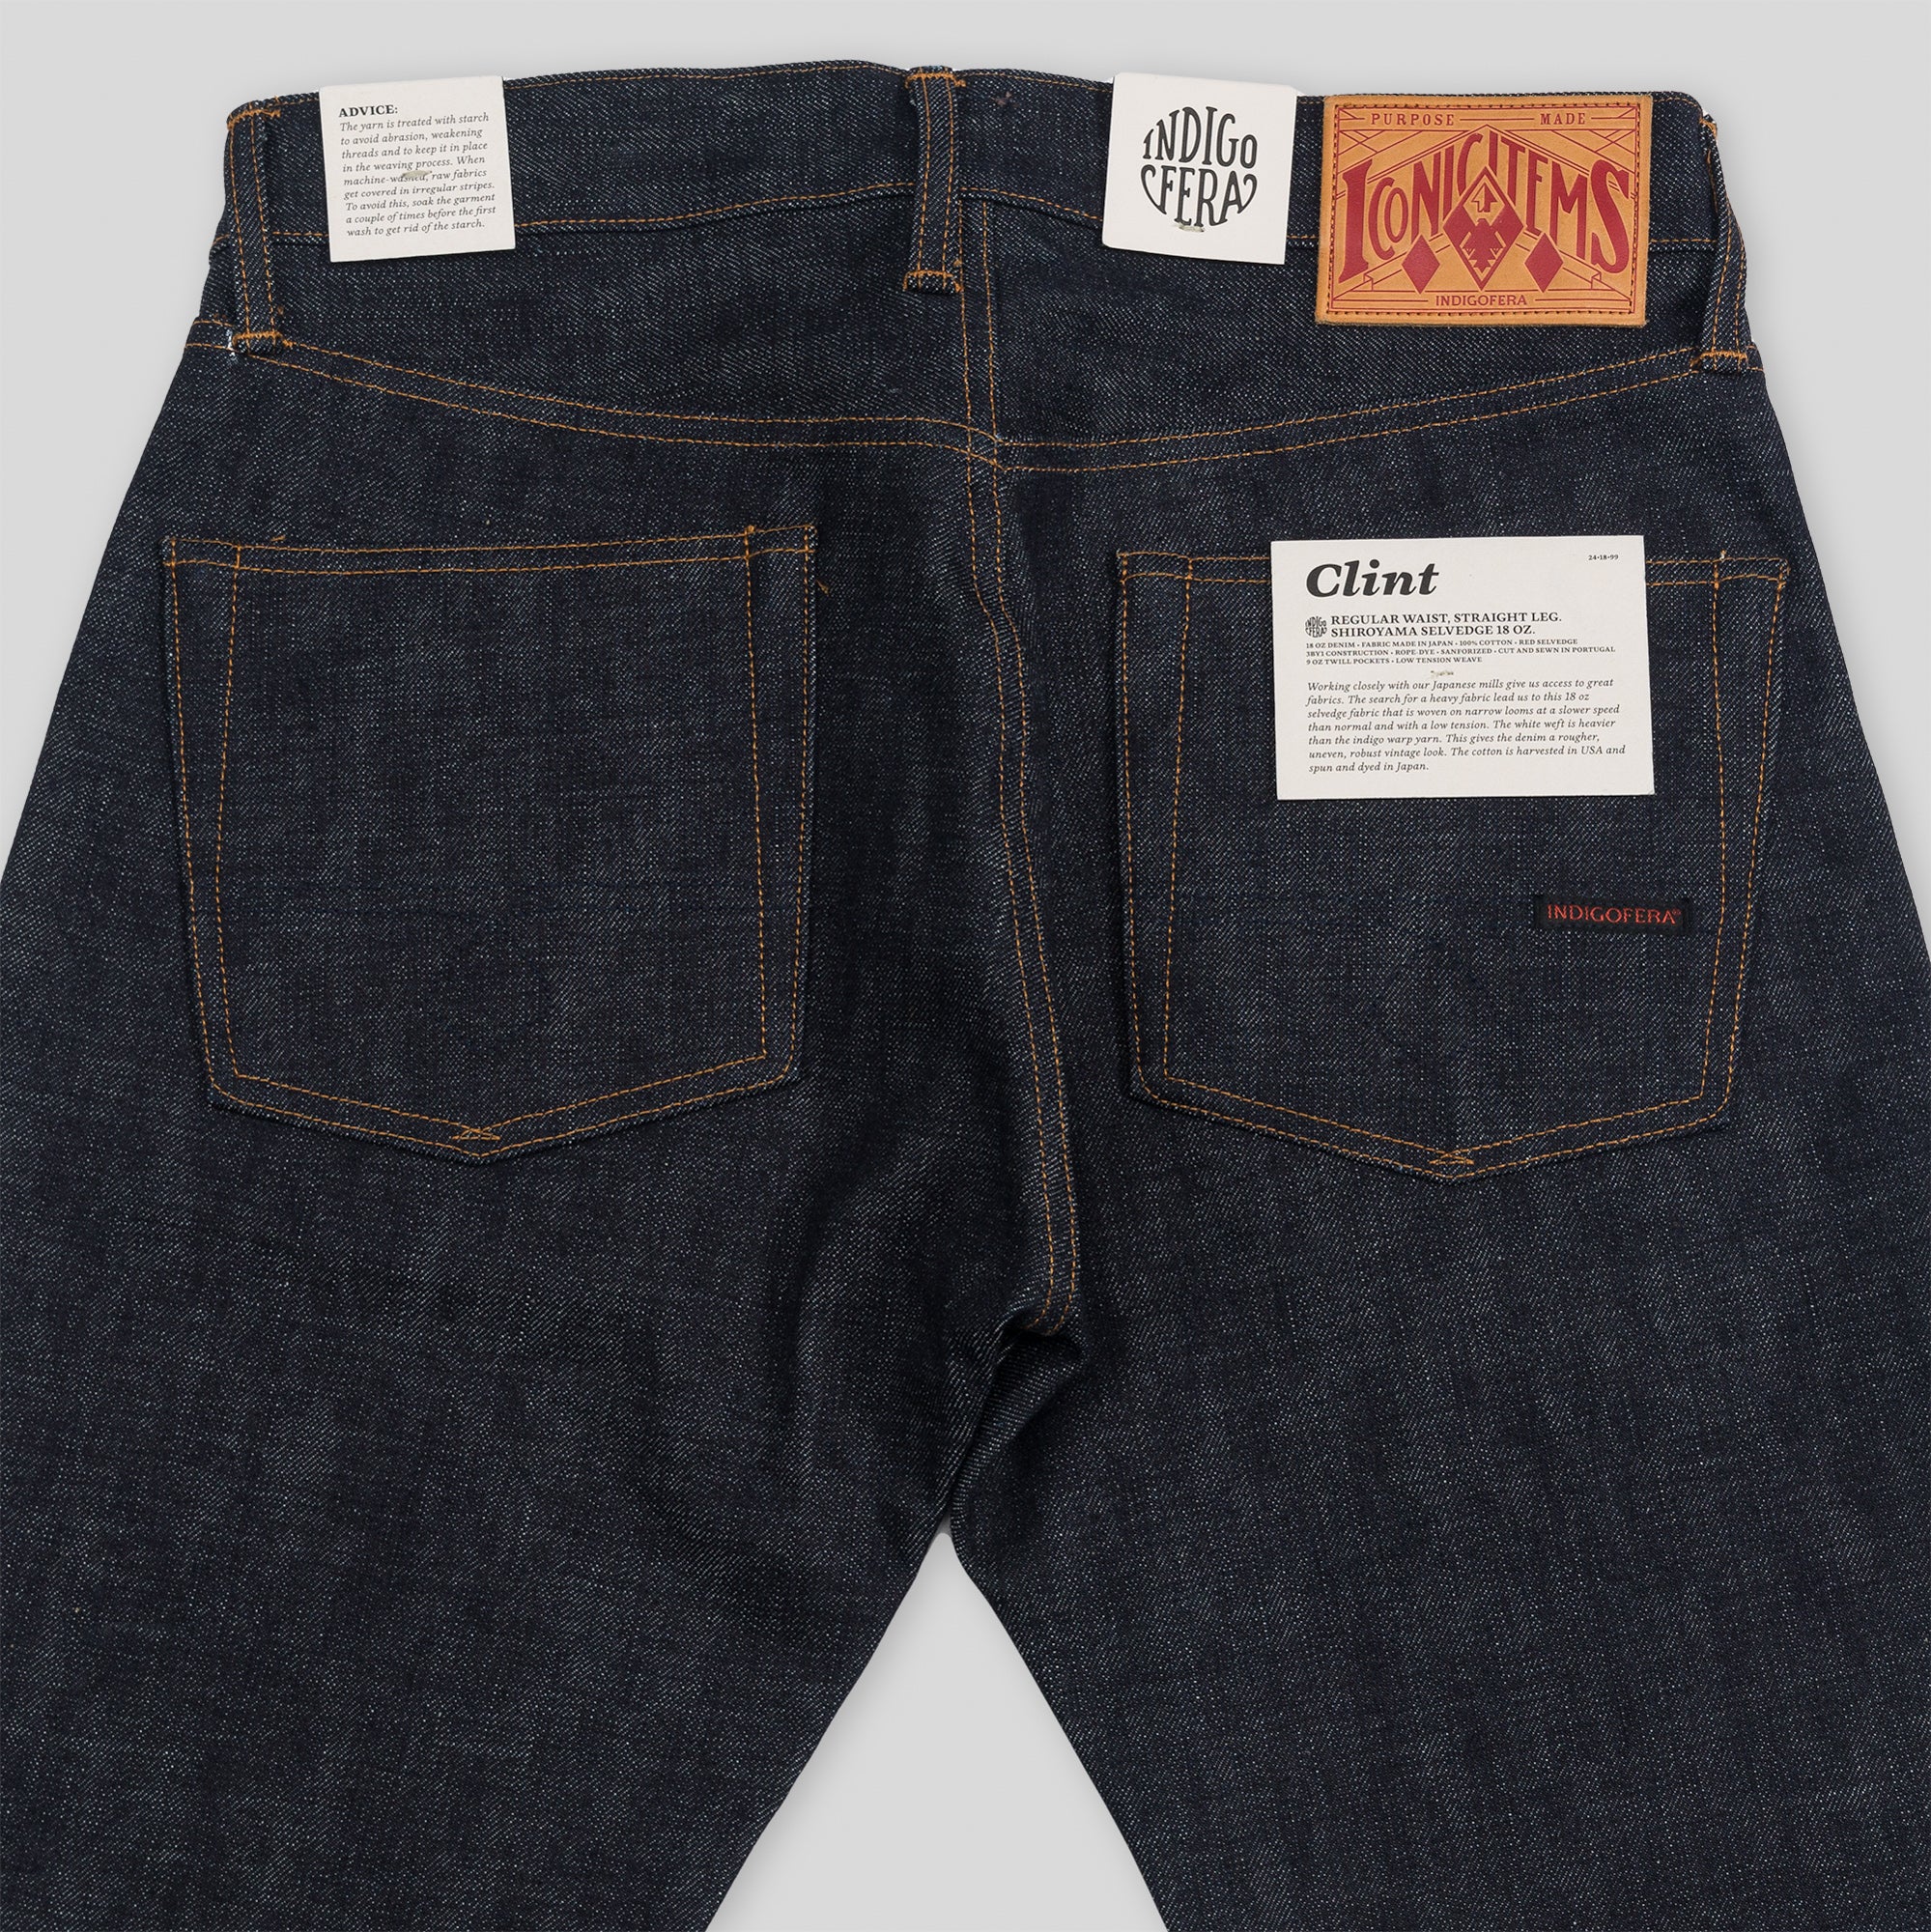 grey levis 501 shrink to fit